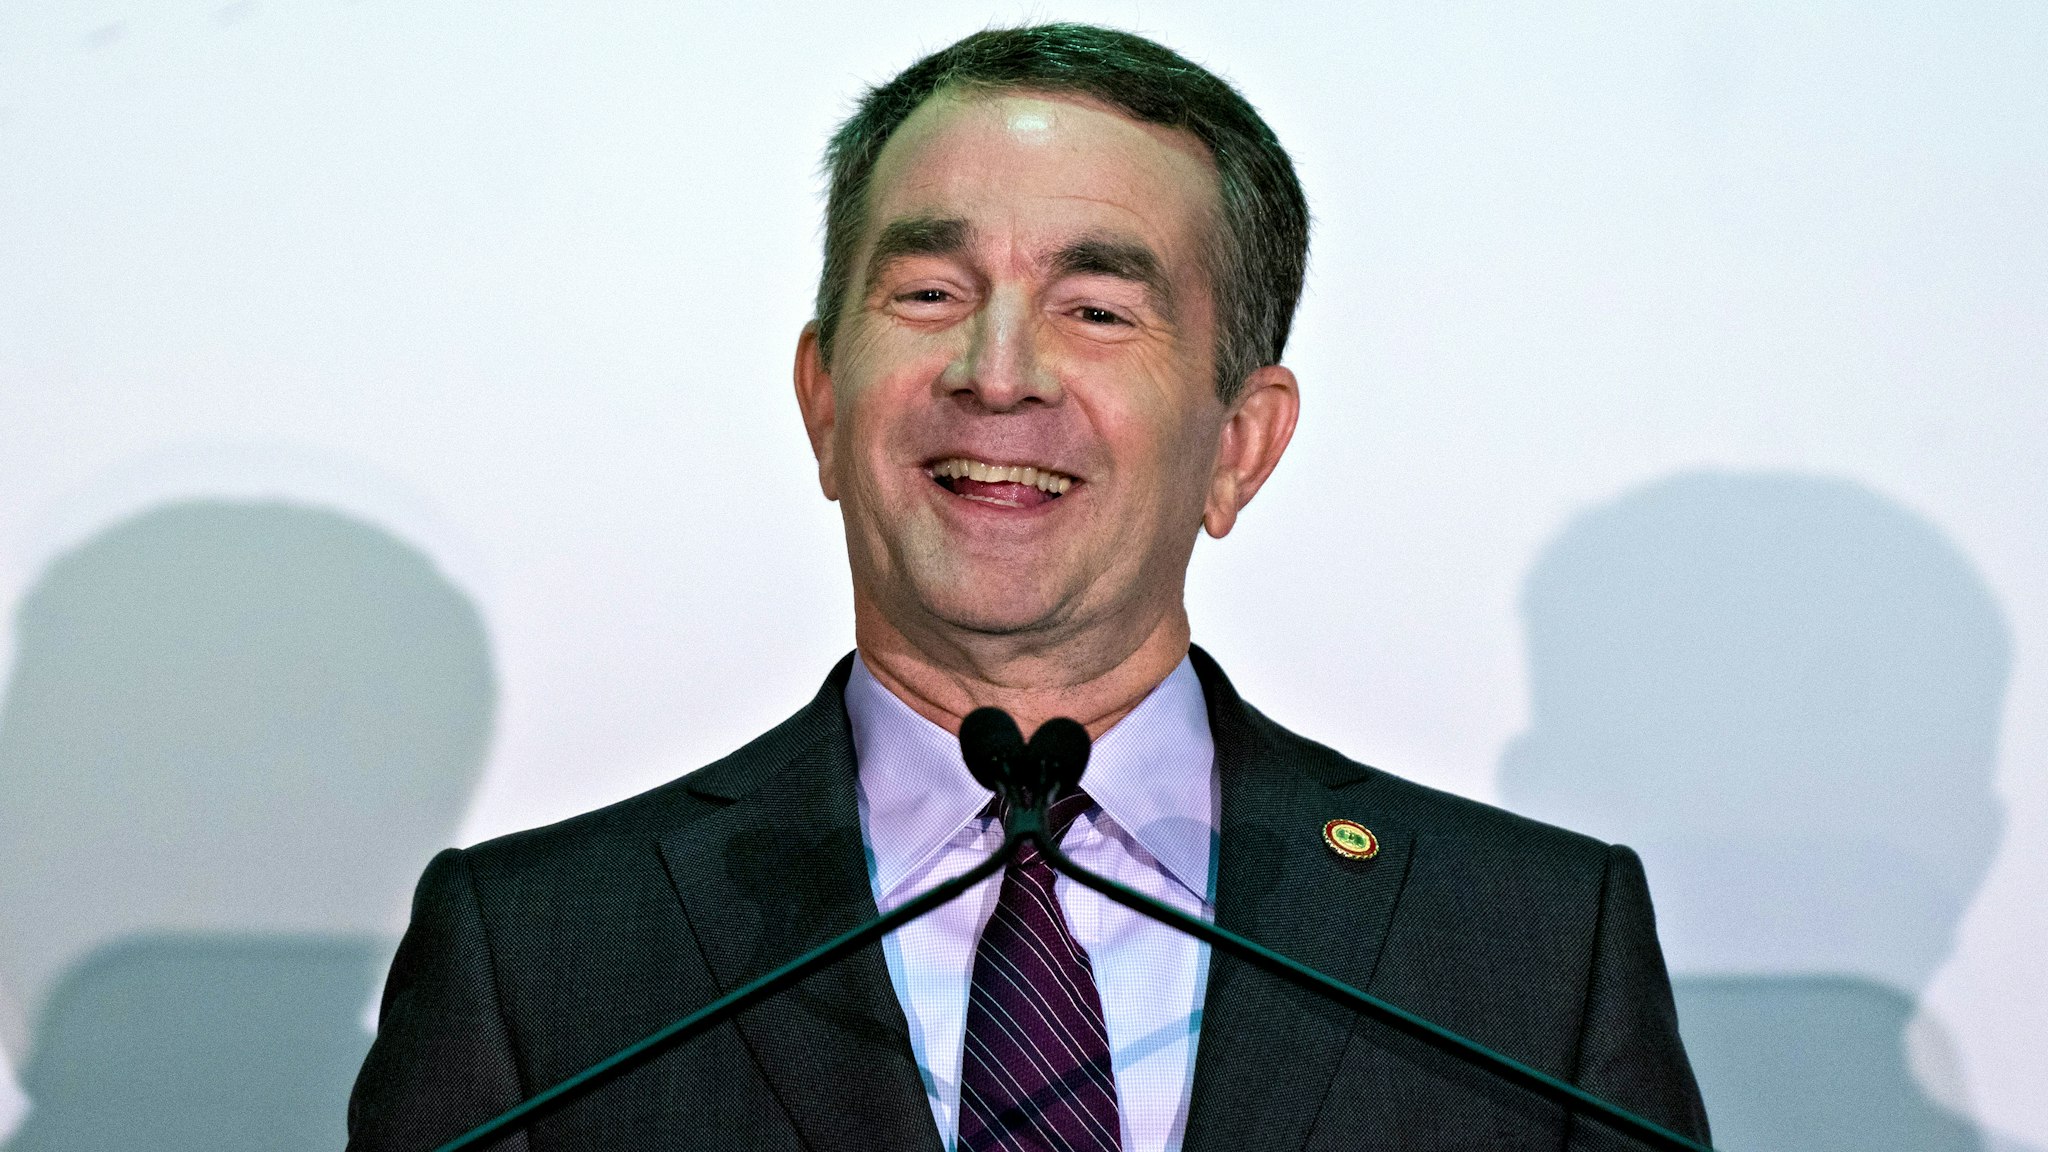 Ralph Northam, governor of Virginia, smiles while speaking during news conference in Arlington, Virginia, U.S., on Tuesday, Nov. 13, 2018. Amazon.com Inc. will build new offices in New York City and Arlington, ending months of jockeying between potential locations across the country vying for a $5 billion investment that promises 50,000 high-paying jobs over almost two decades.